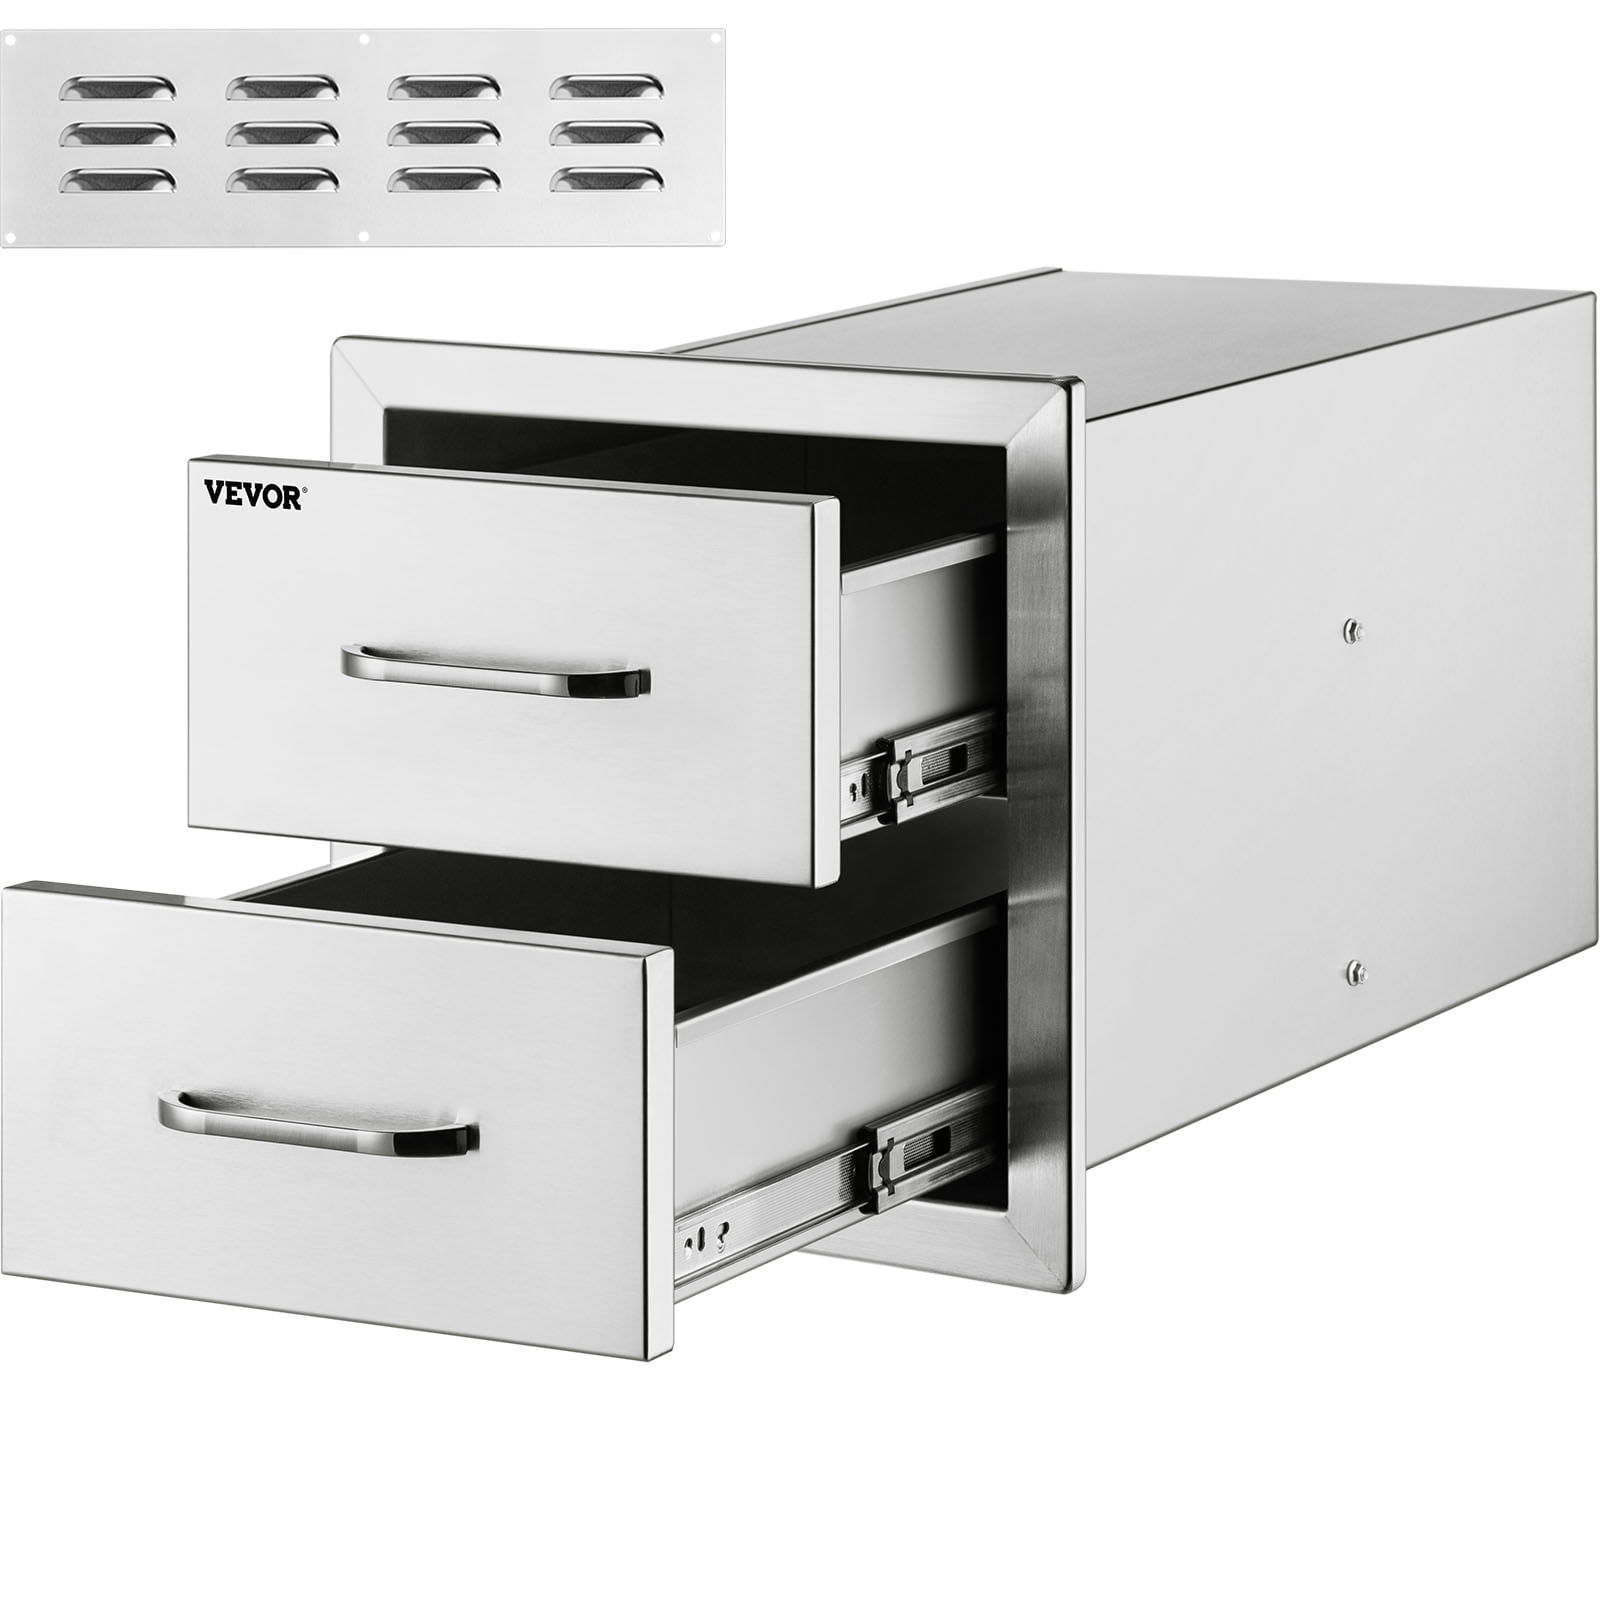 Triple Layer BBQ Drawers Flush Mount for Outdoor Kitchen or BBQ Island wujomeas Outdoor Kitchen Drawers Stainless Steel 